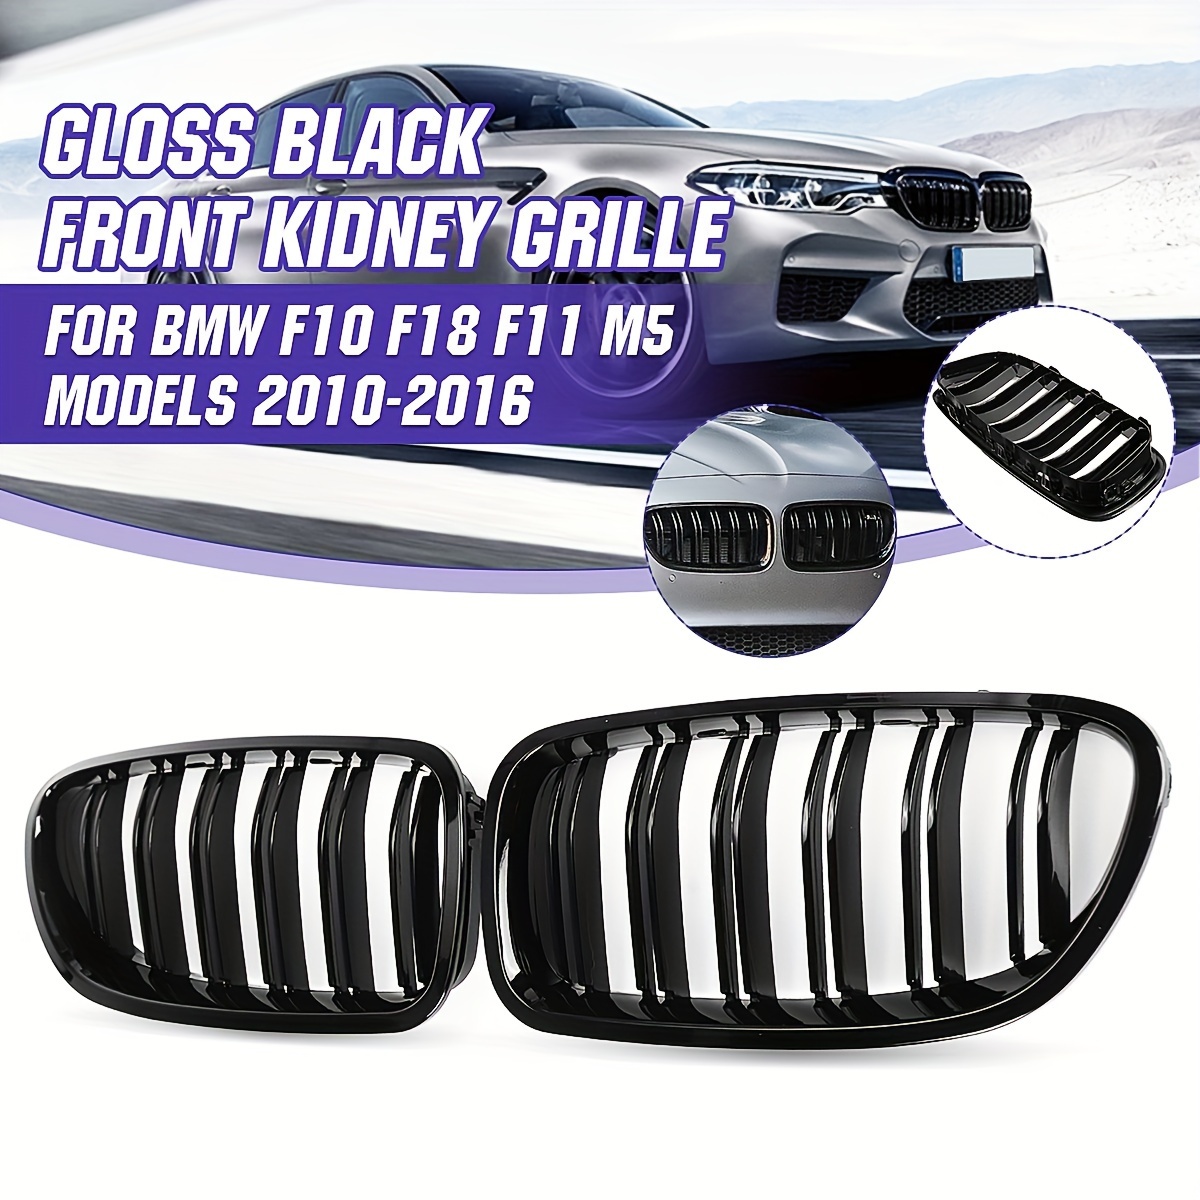 

Car Front Kidney Grille Grill For 5 Series F10 F11 F18 520d 530d 540i 2010 2011 2012 2013 2014 2015 2016 2017 Racing Grill